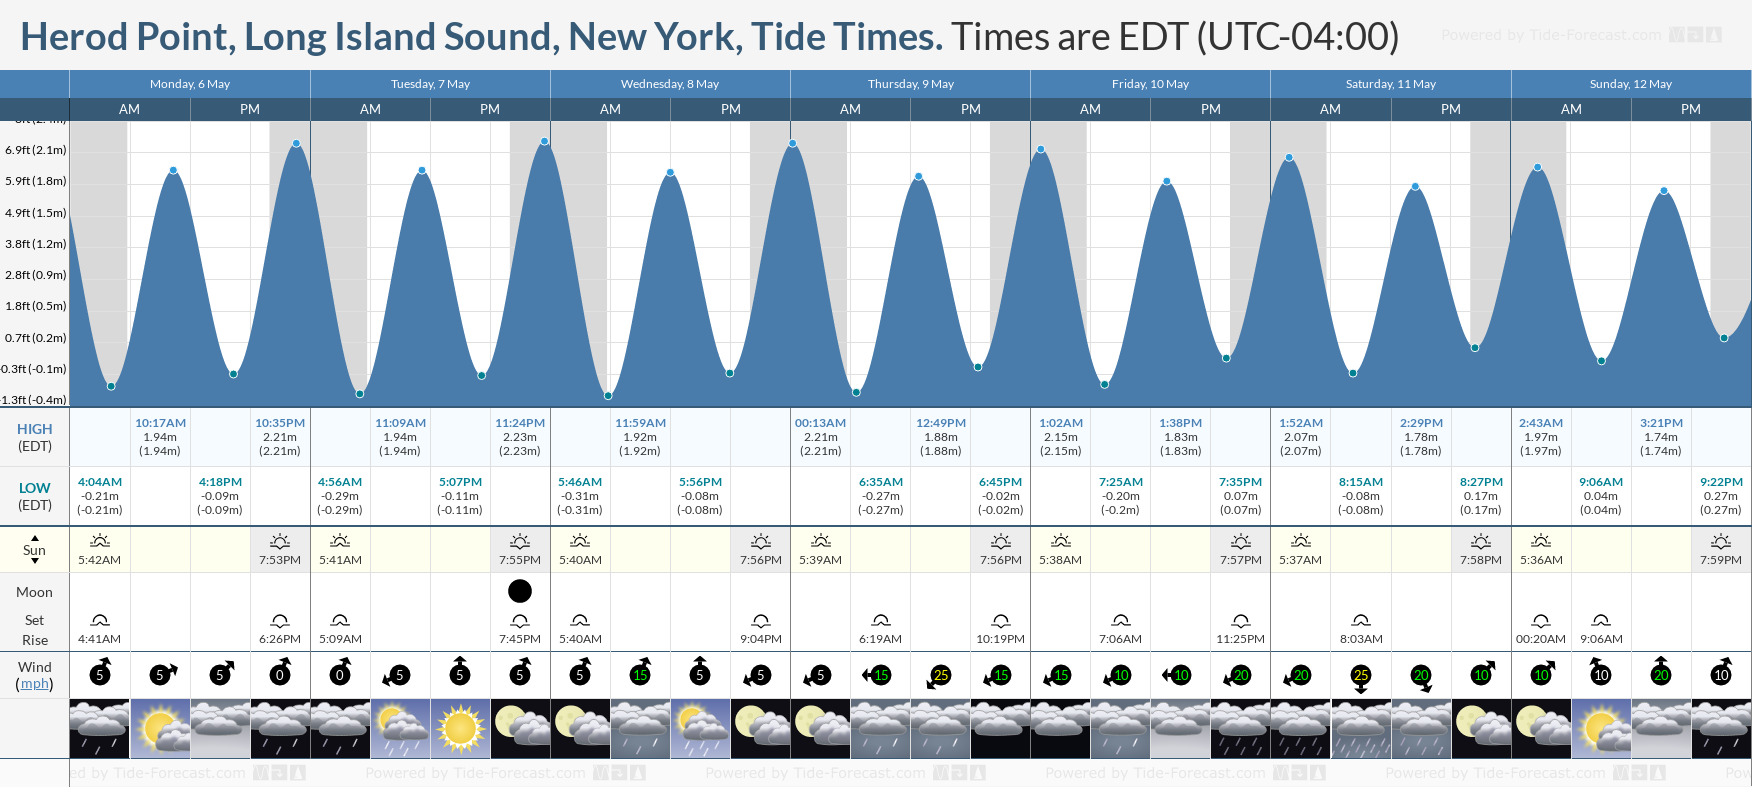 Herod Point, Long Island Sound, New York Tide Chart including high and low tide times for the next 7 days